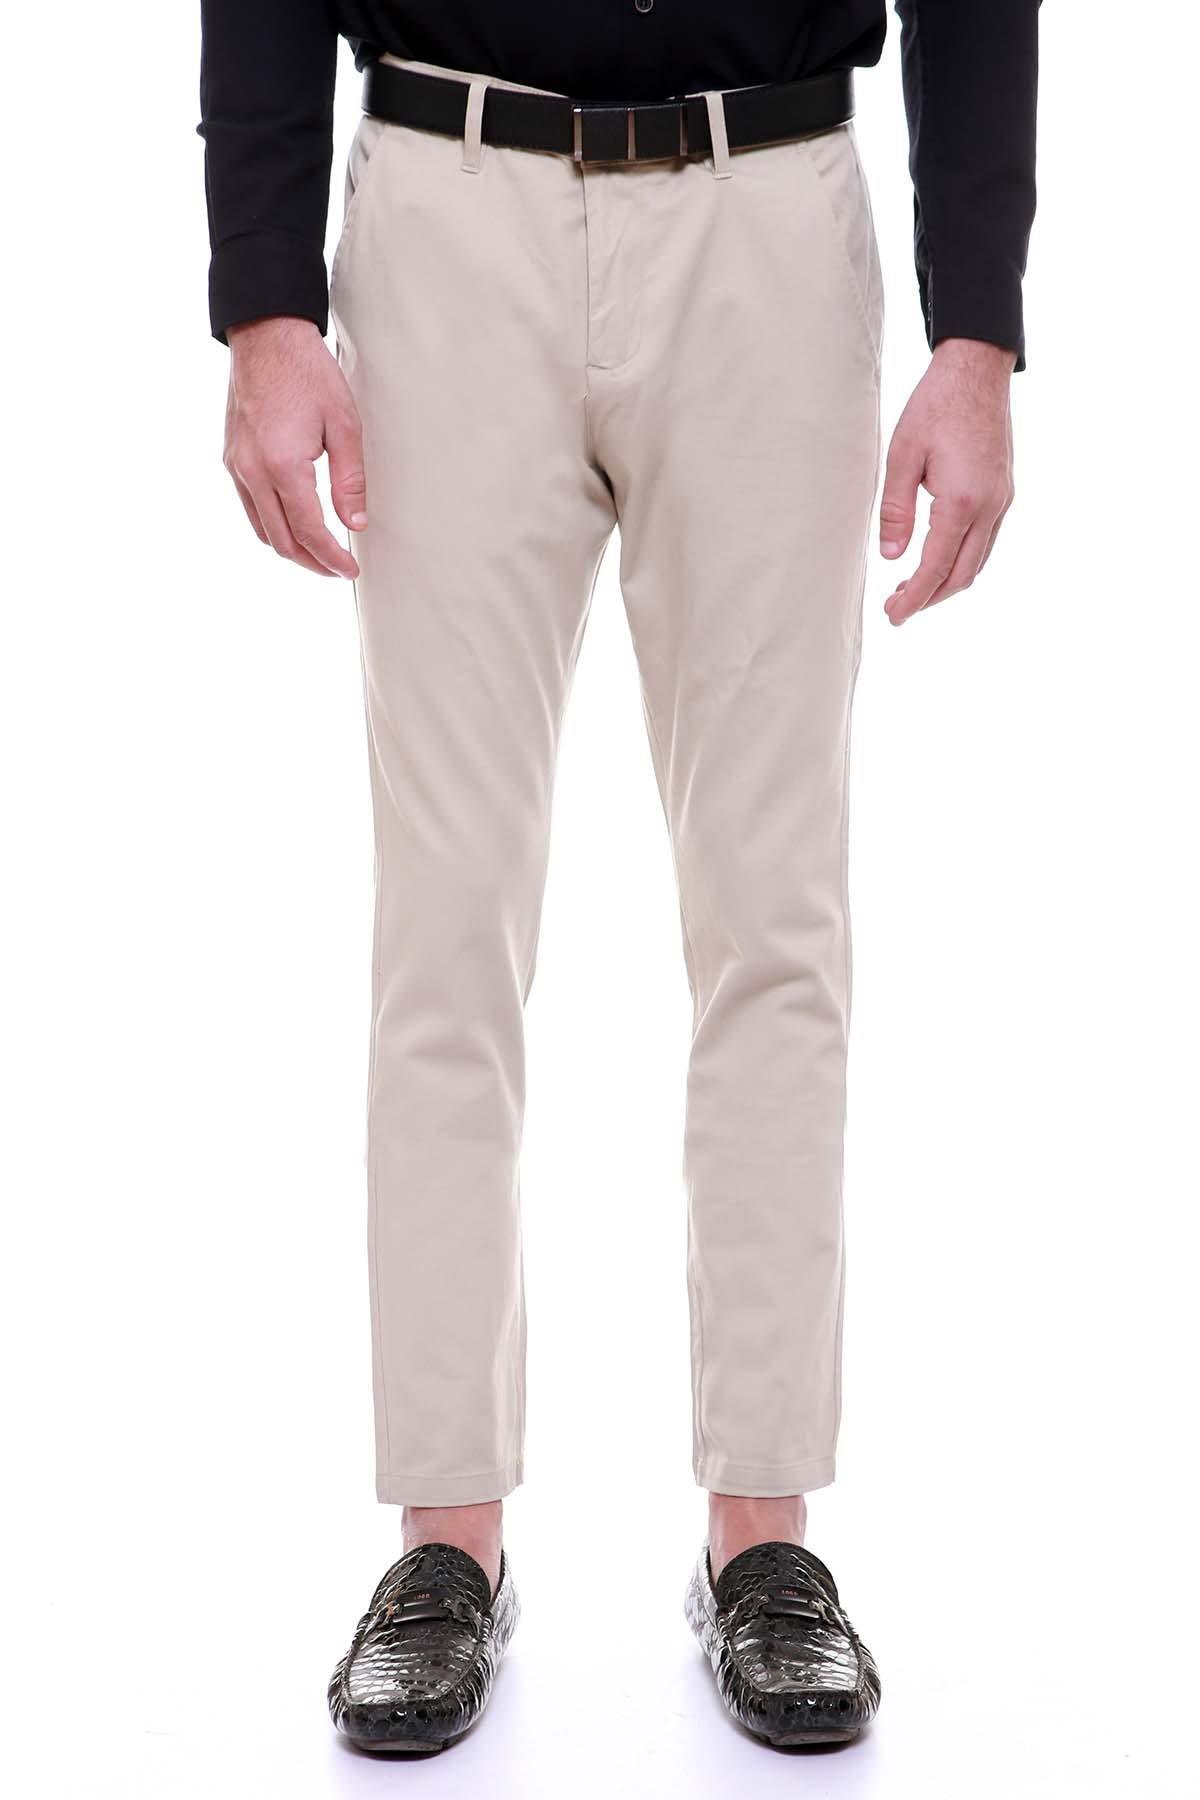 C PANT CROSS POCKET BEIGE at Charcoal Clothing